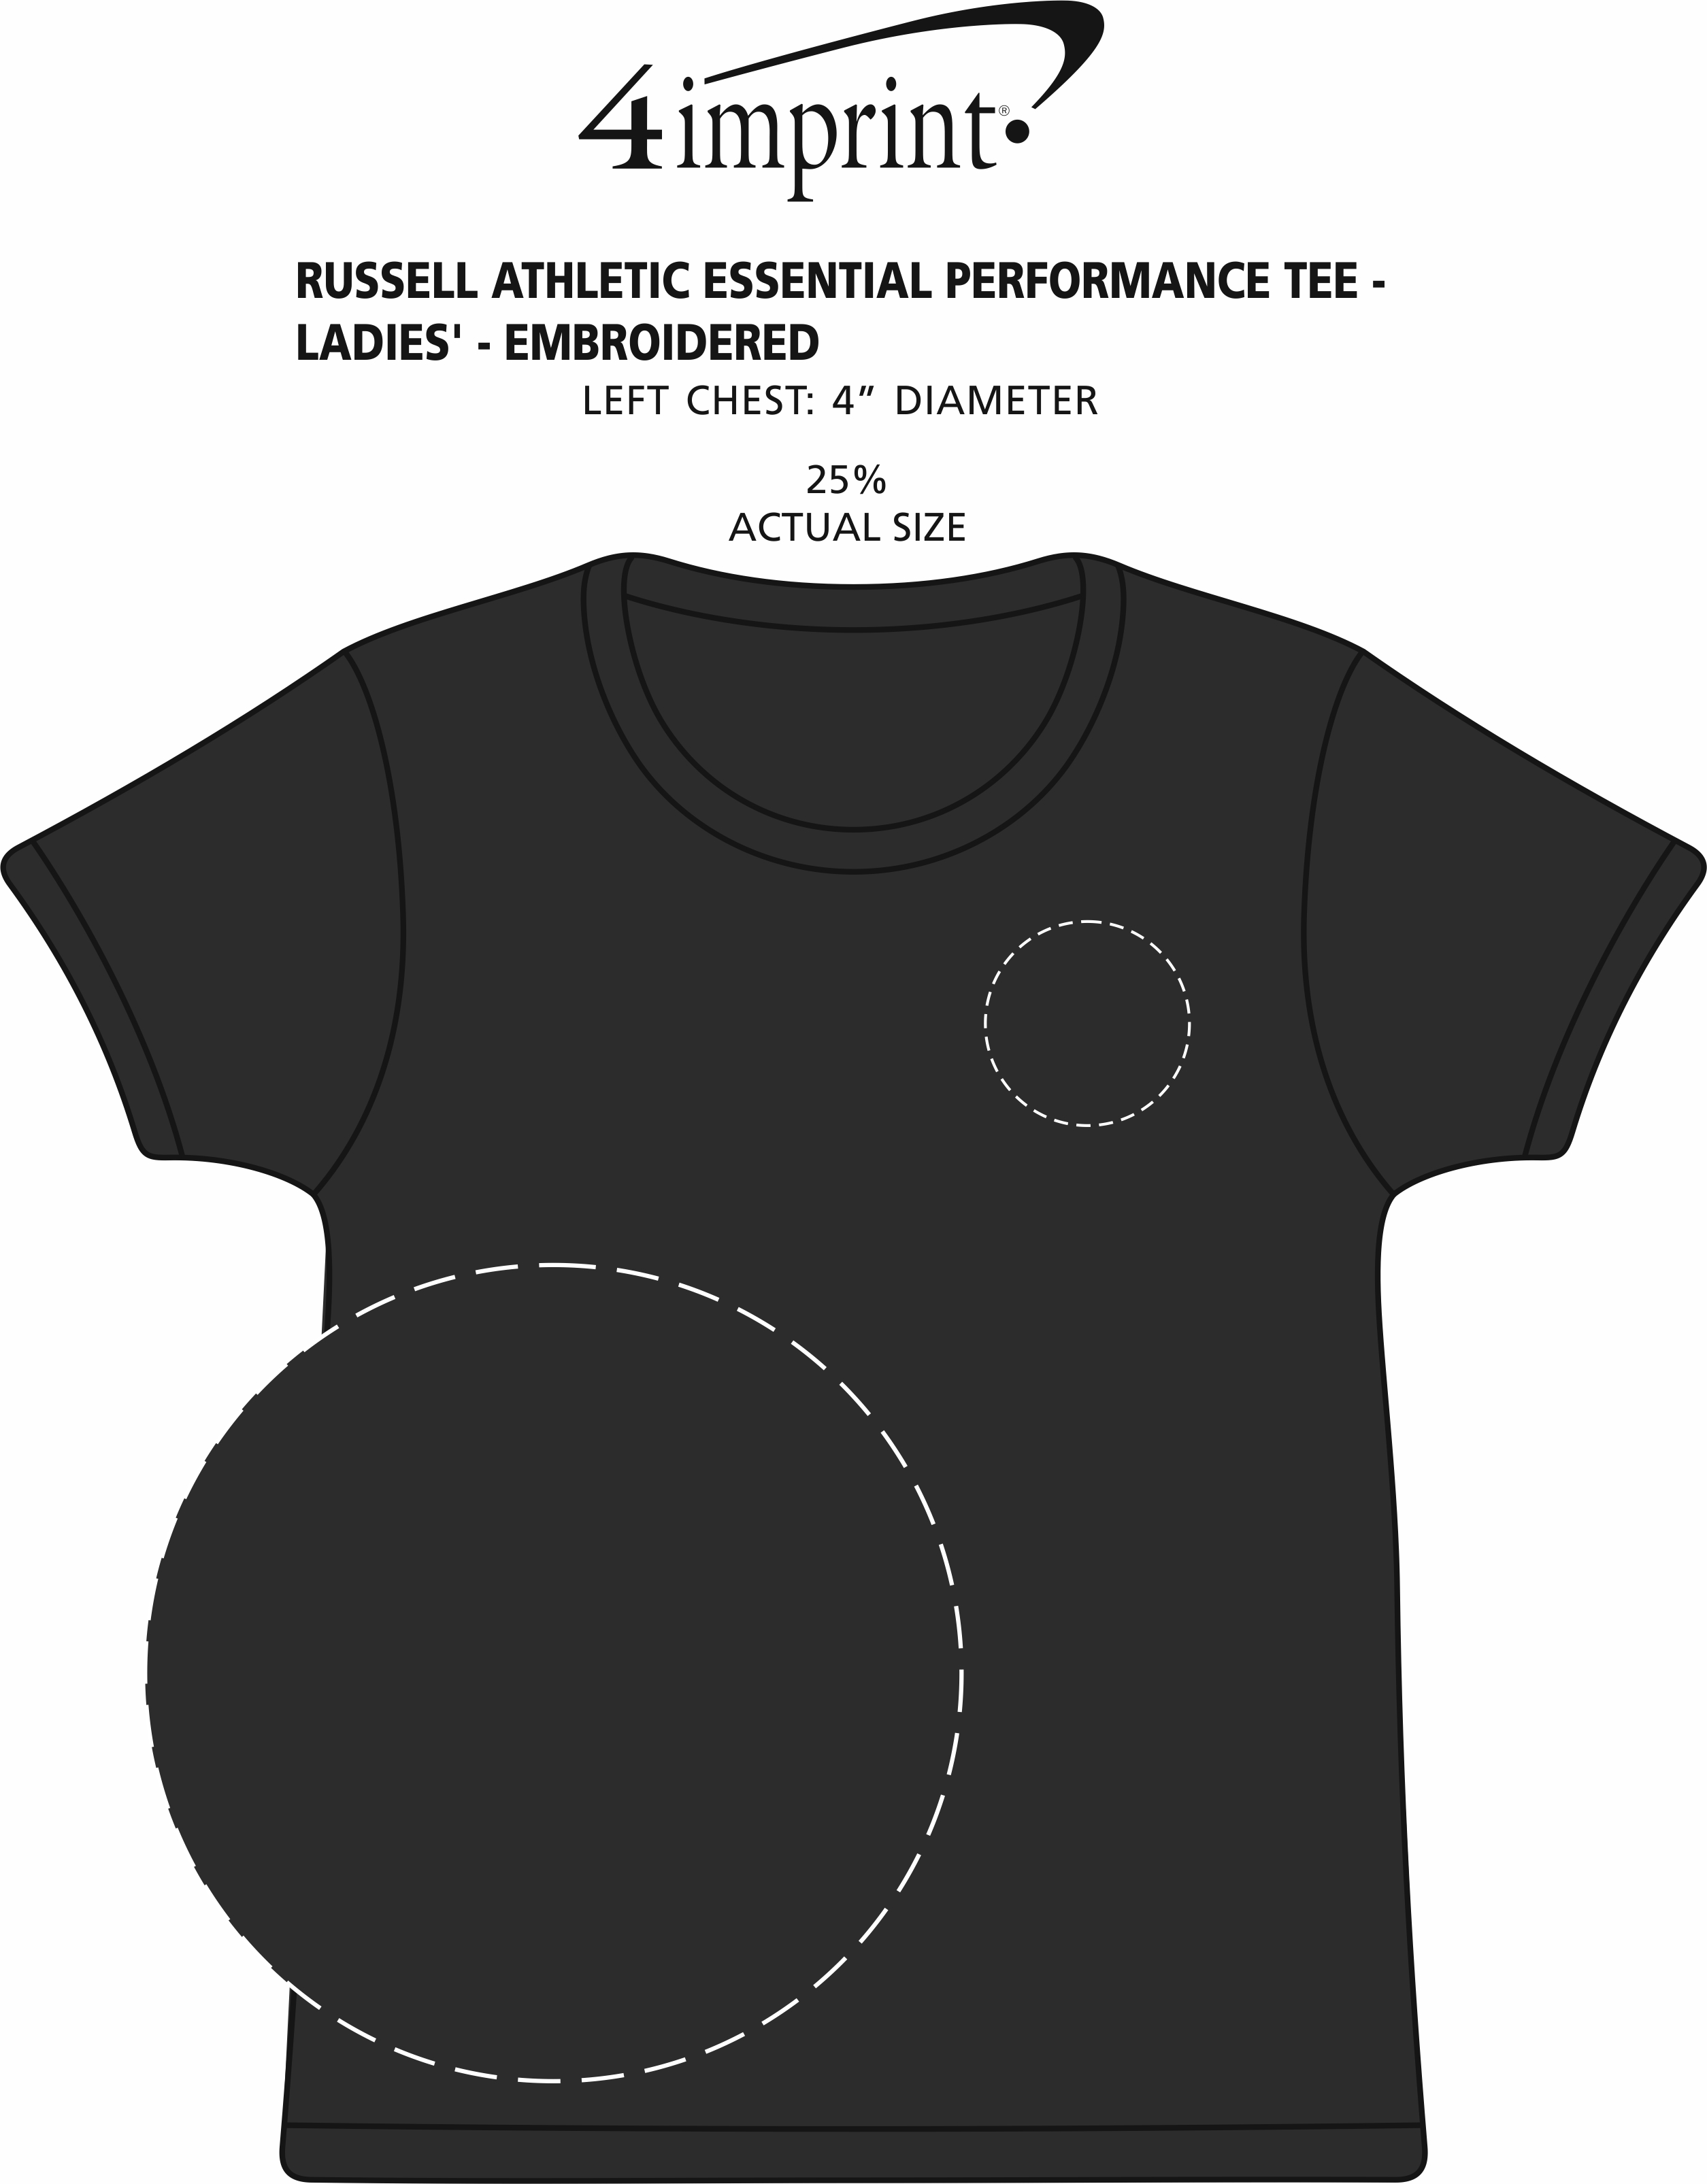 Imprint Area of Russell Athletic Essential Performance Tee - Ladies' - Embroidered